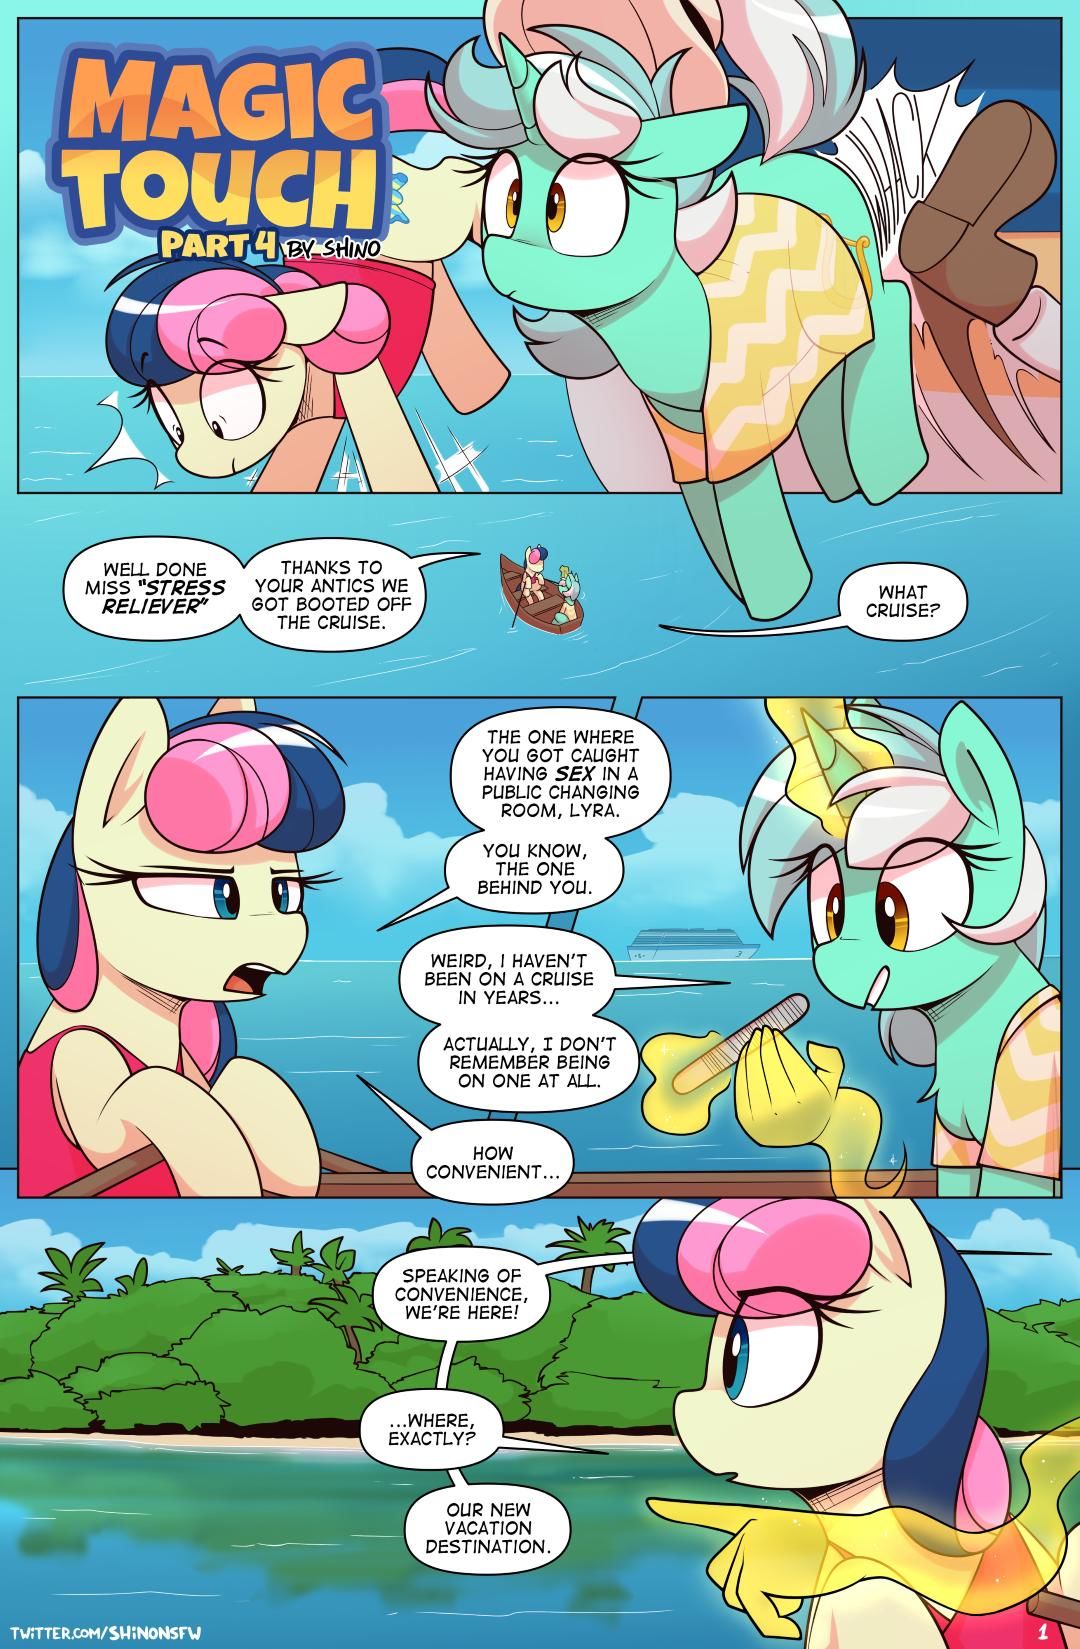 Magic Touch 4 - Shinodage [My Little Pony] page 1